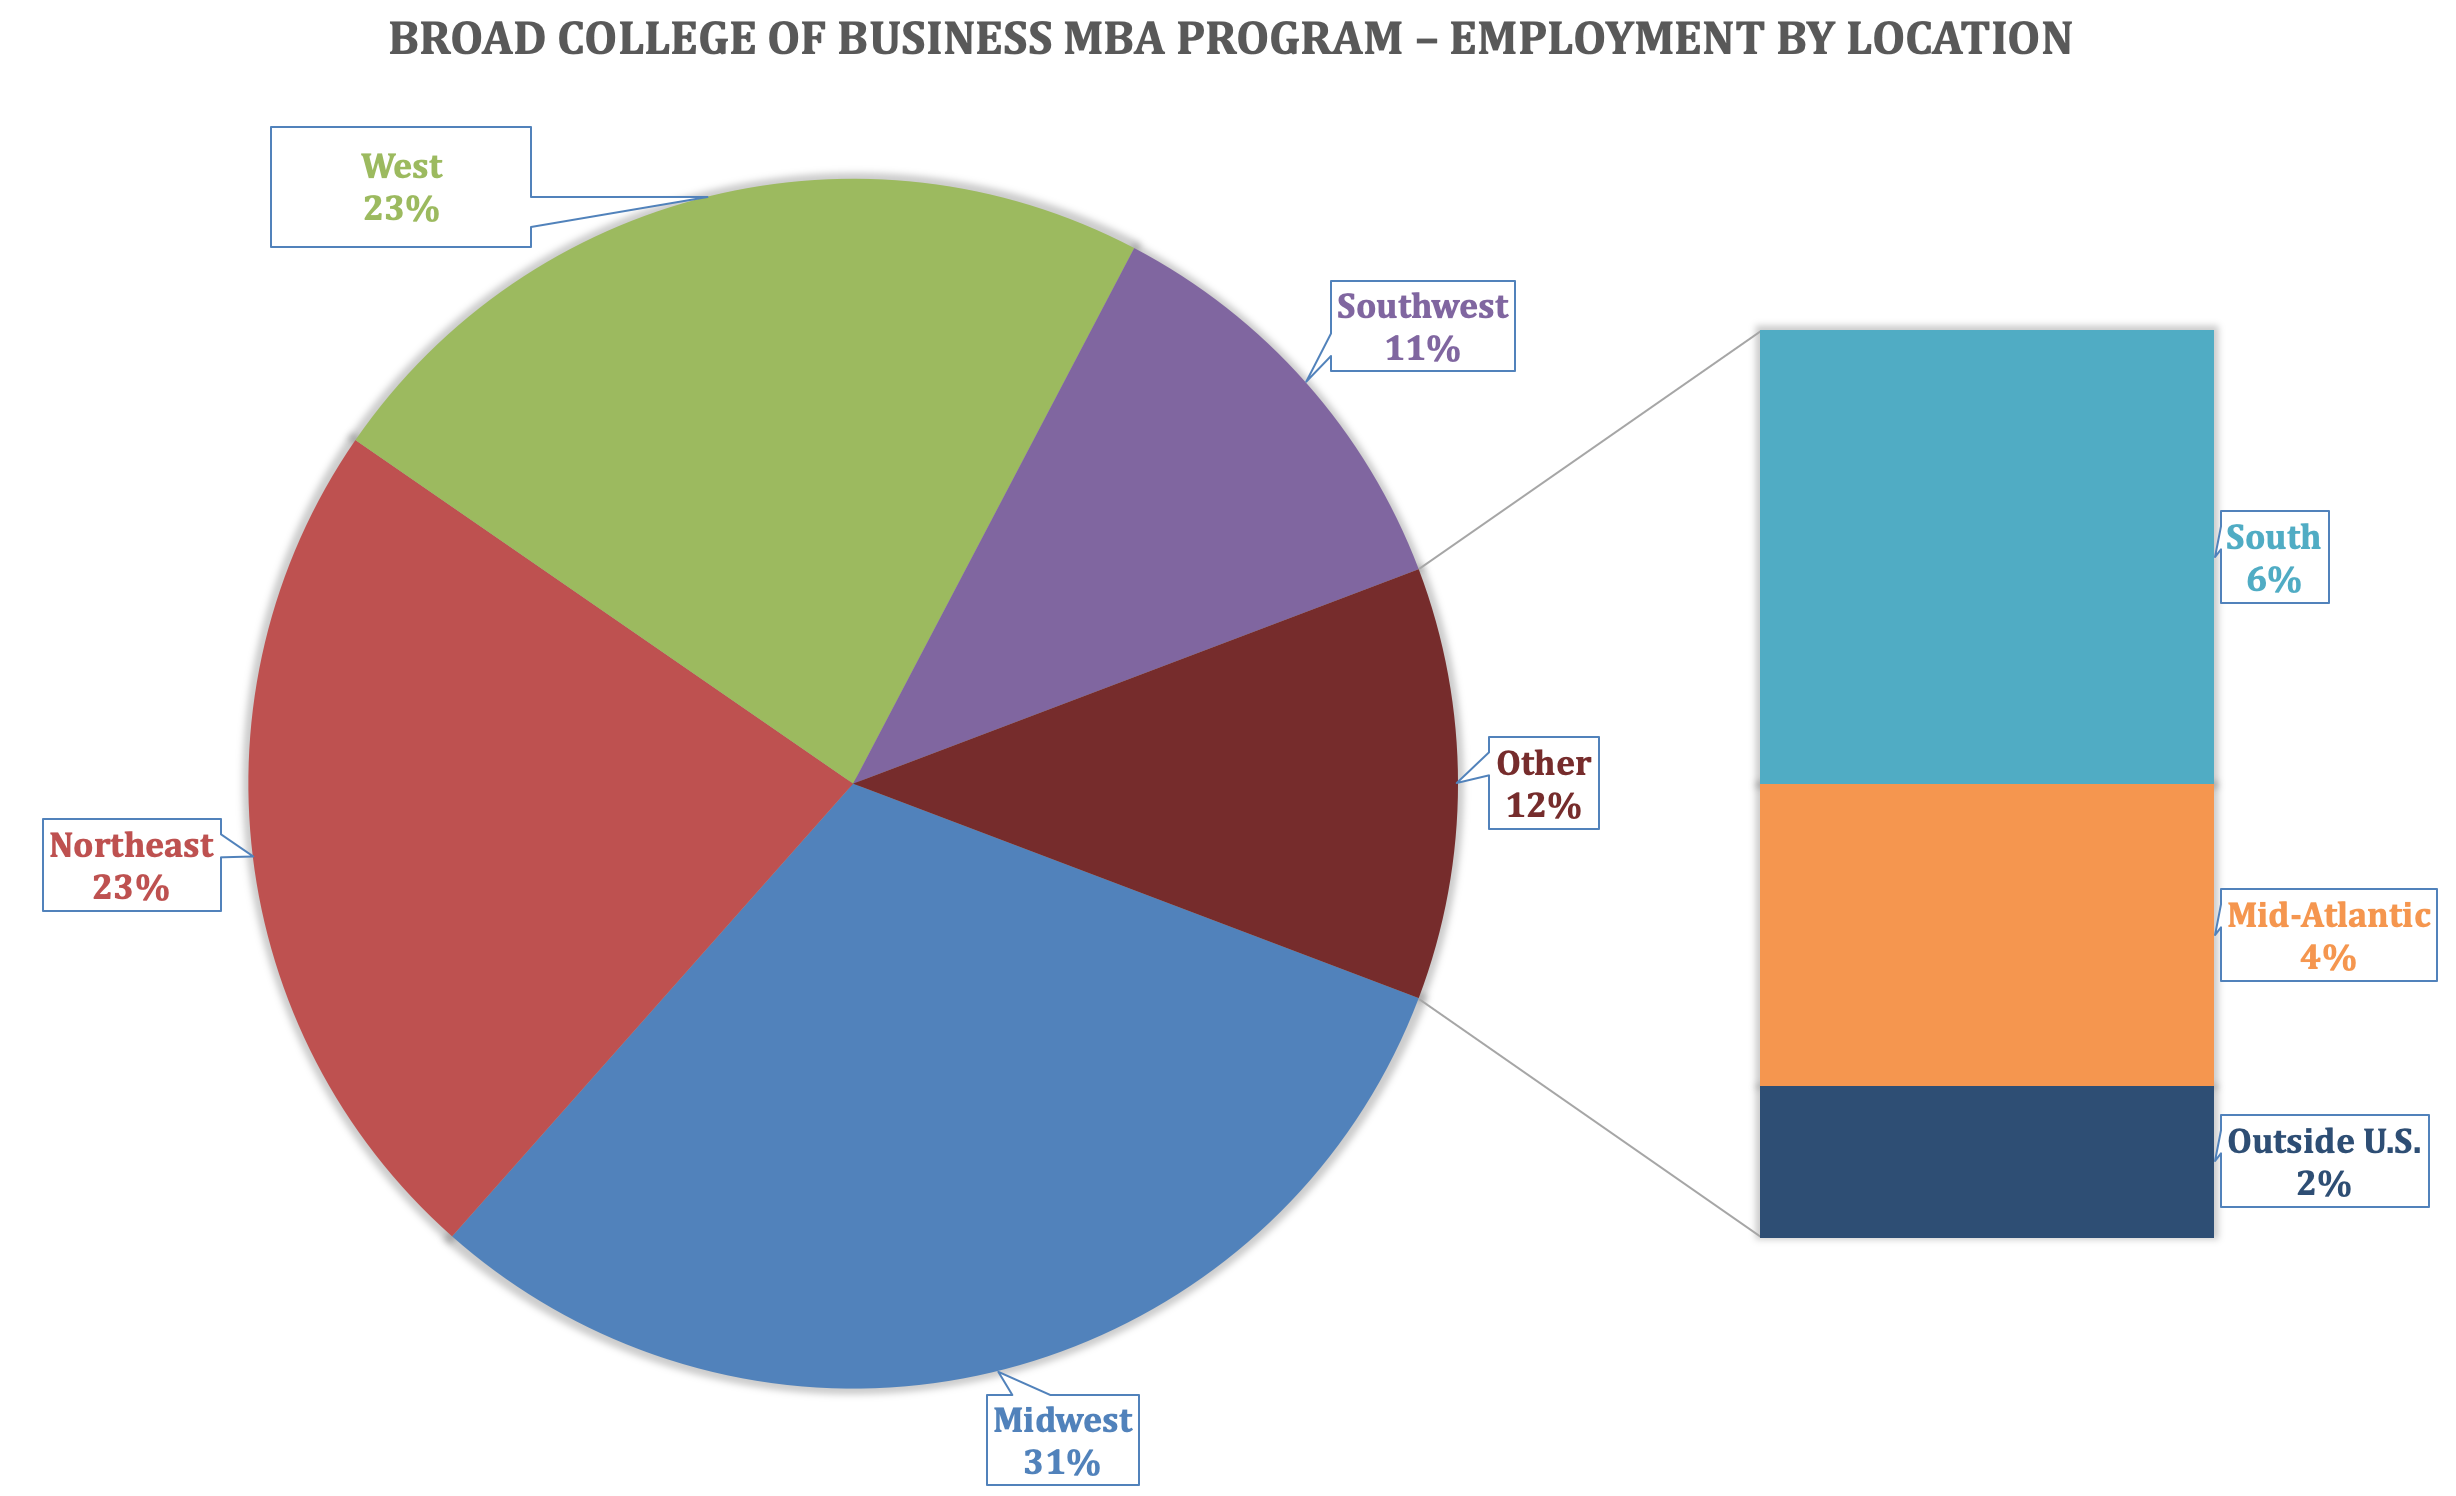 MSU MBA Program - Broad College of Business - Employment by Location